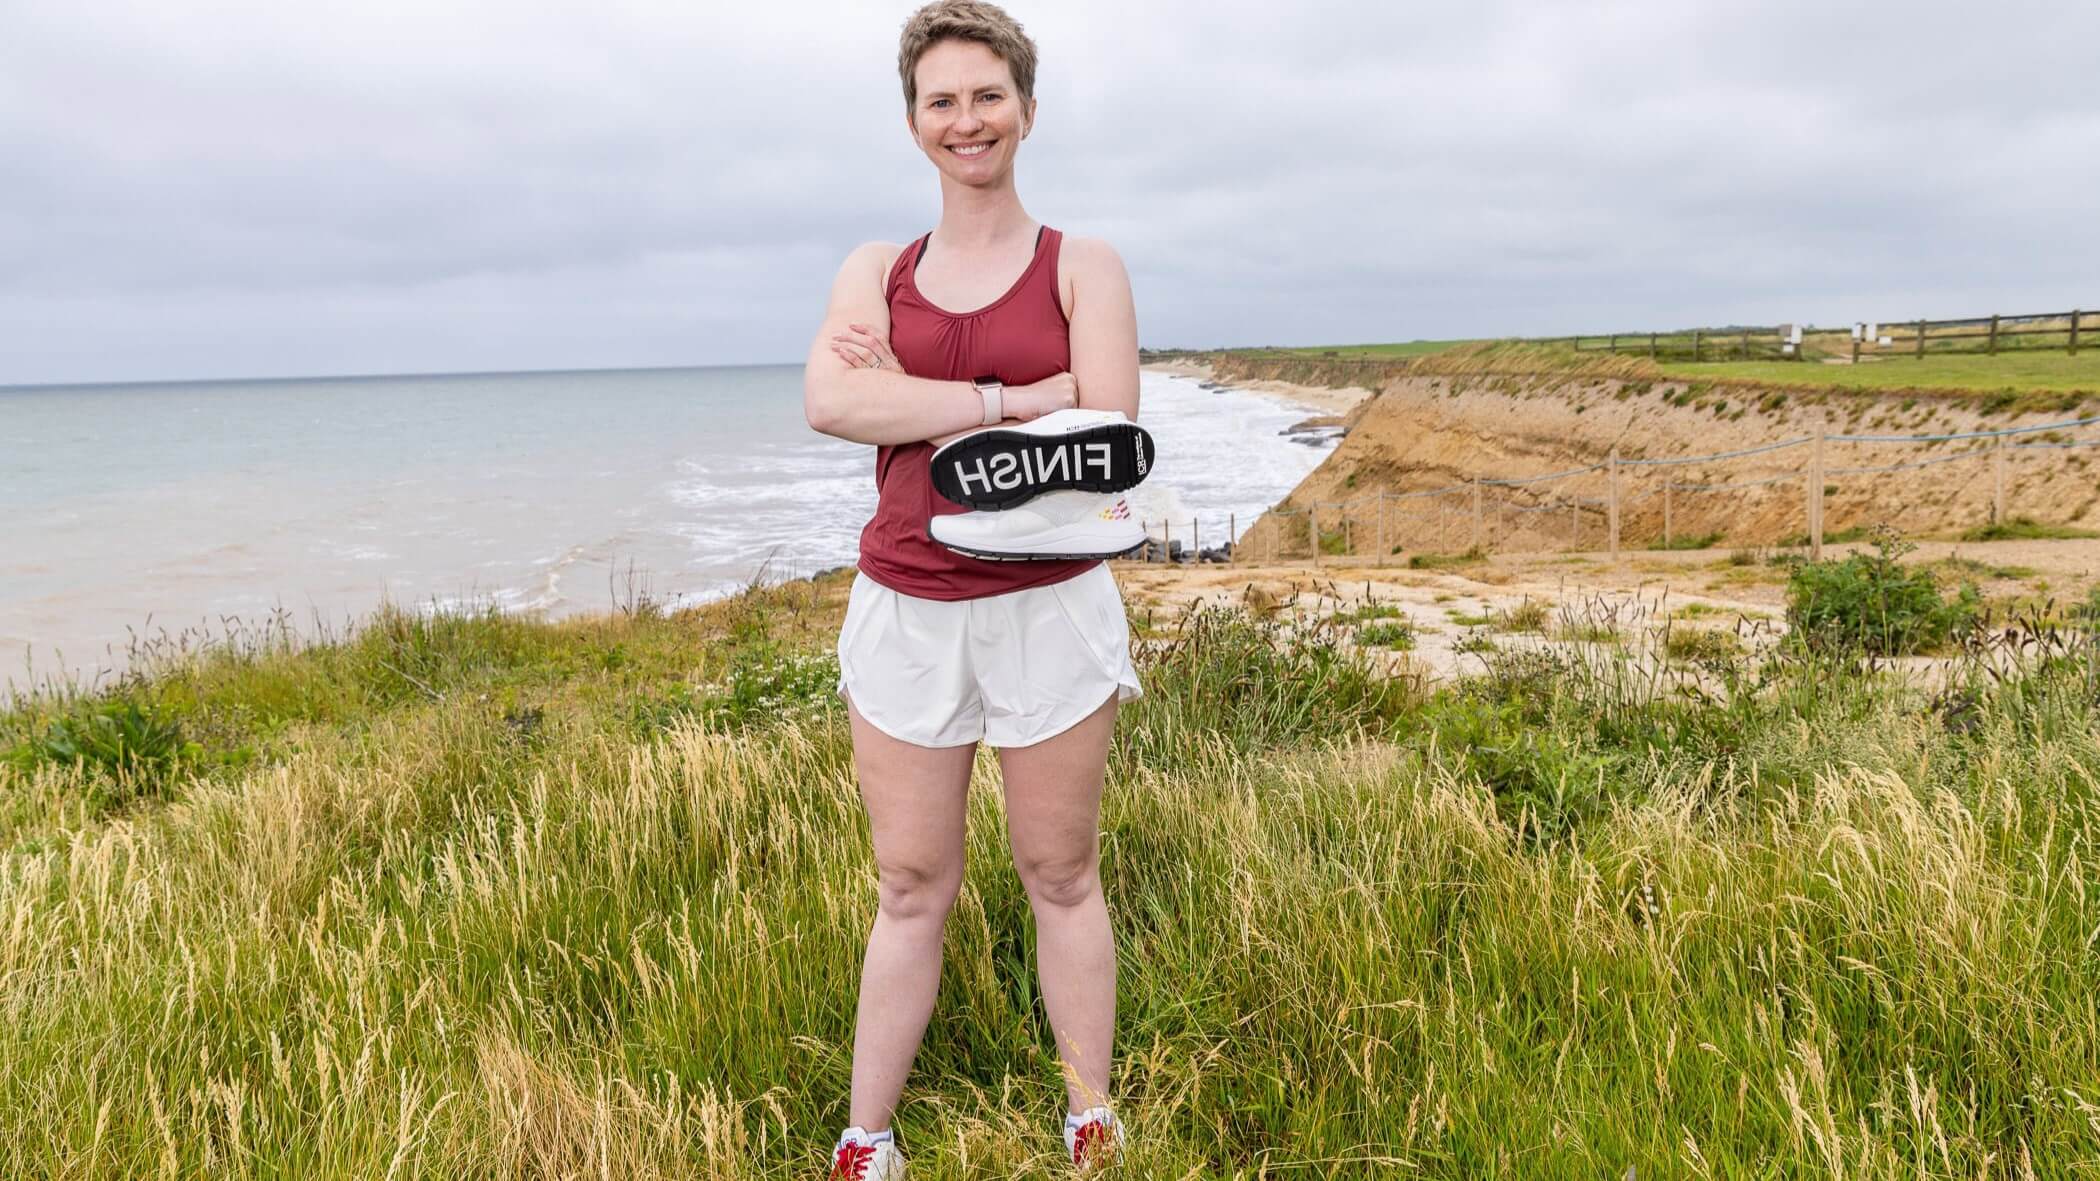 Erin stands on a beach with her arms crossed holding a specially made ICR running shoe with FINISH CANCER on the sole